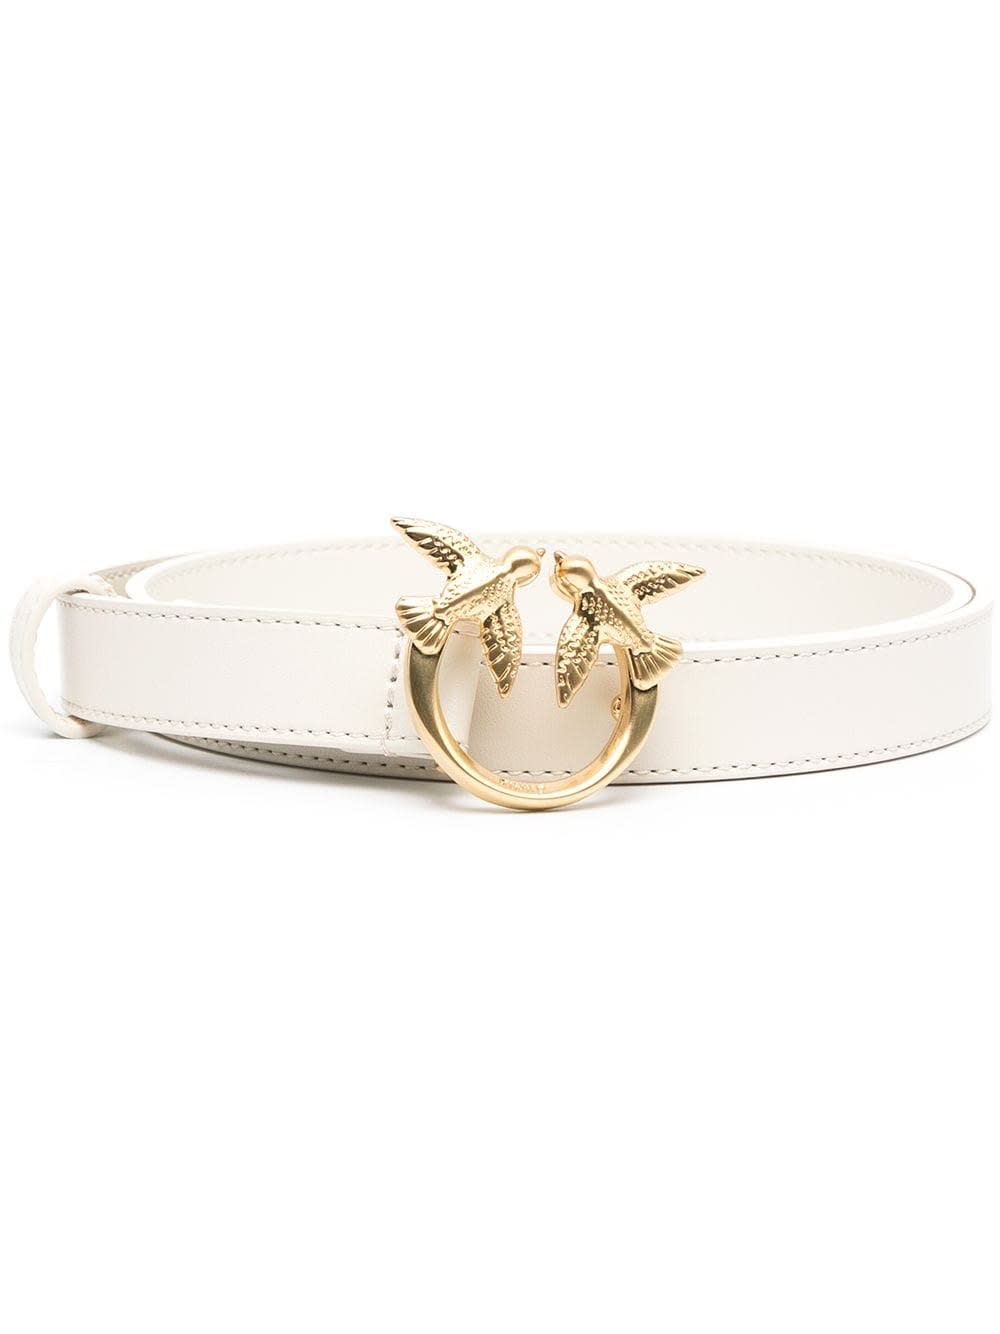 Pinko Love Berry Belt In White Leather With Logoed Buckle